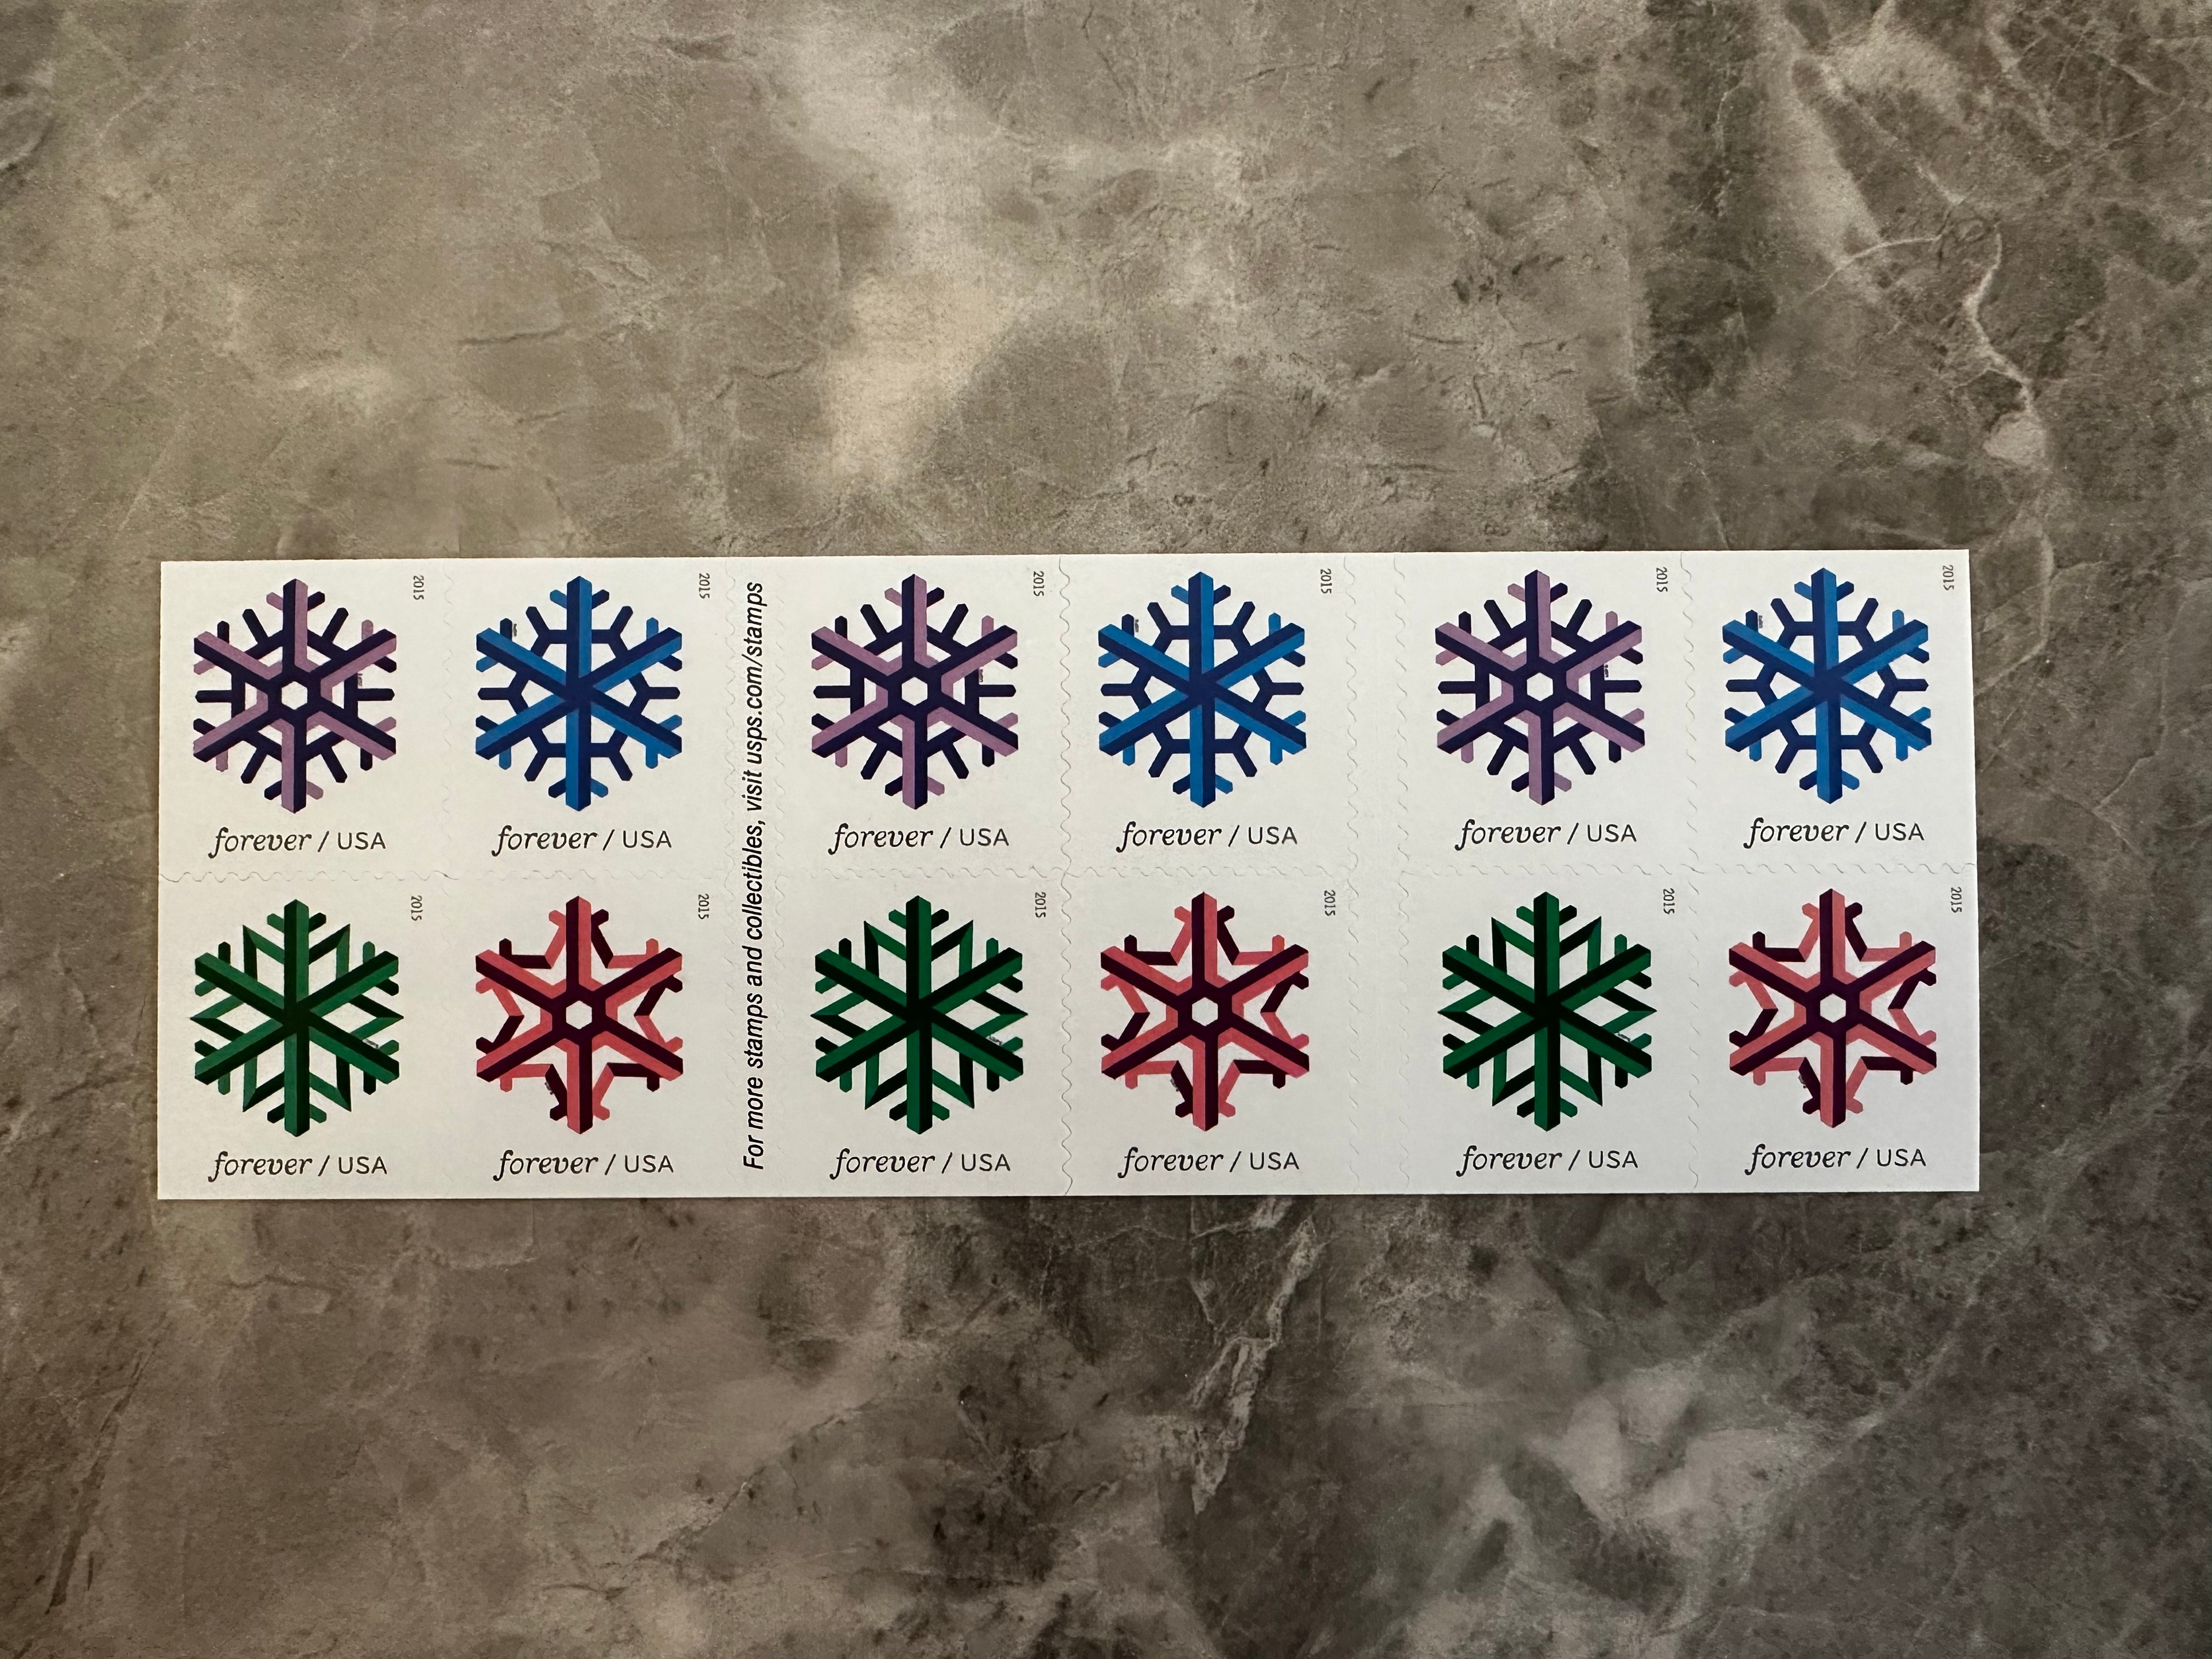 USPS Geometric Snowflakes Forever First Class Postage Stamps